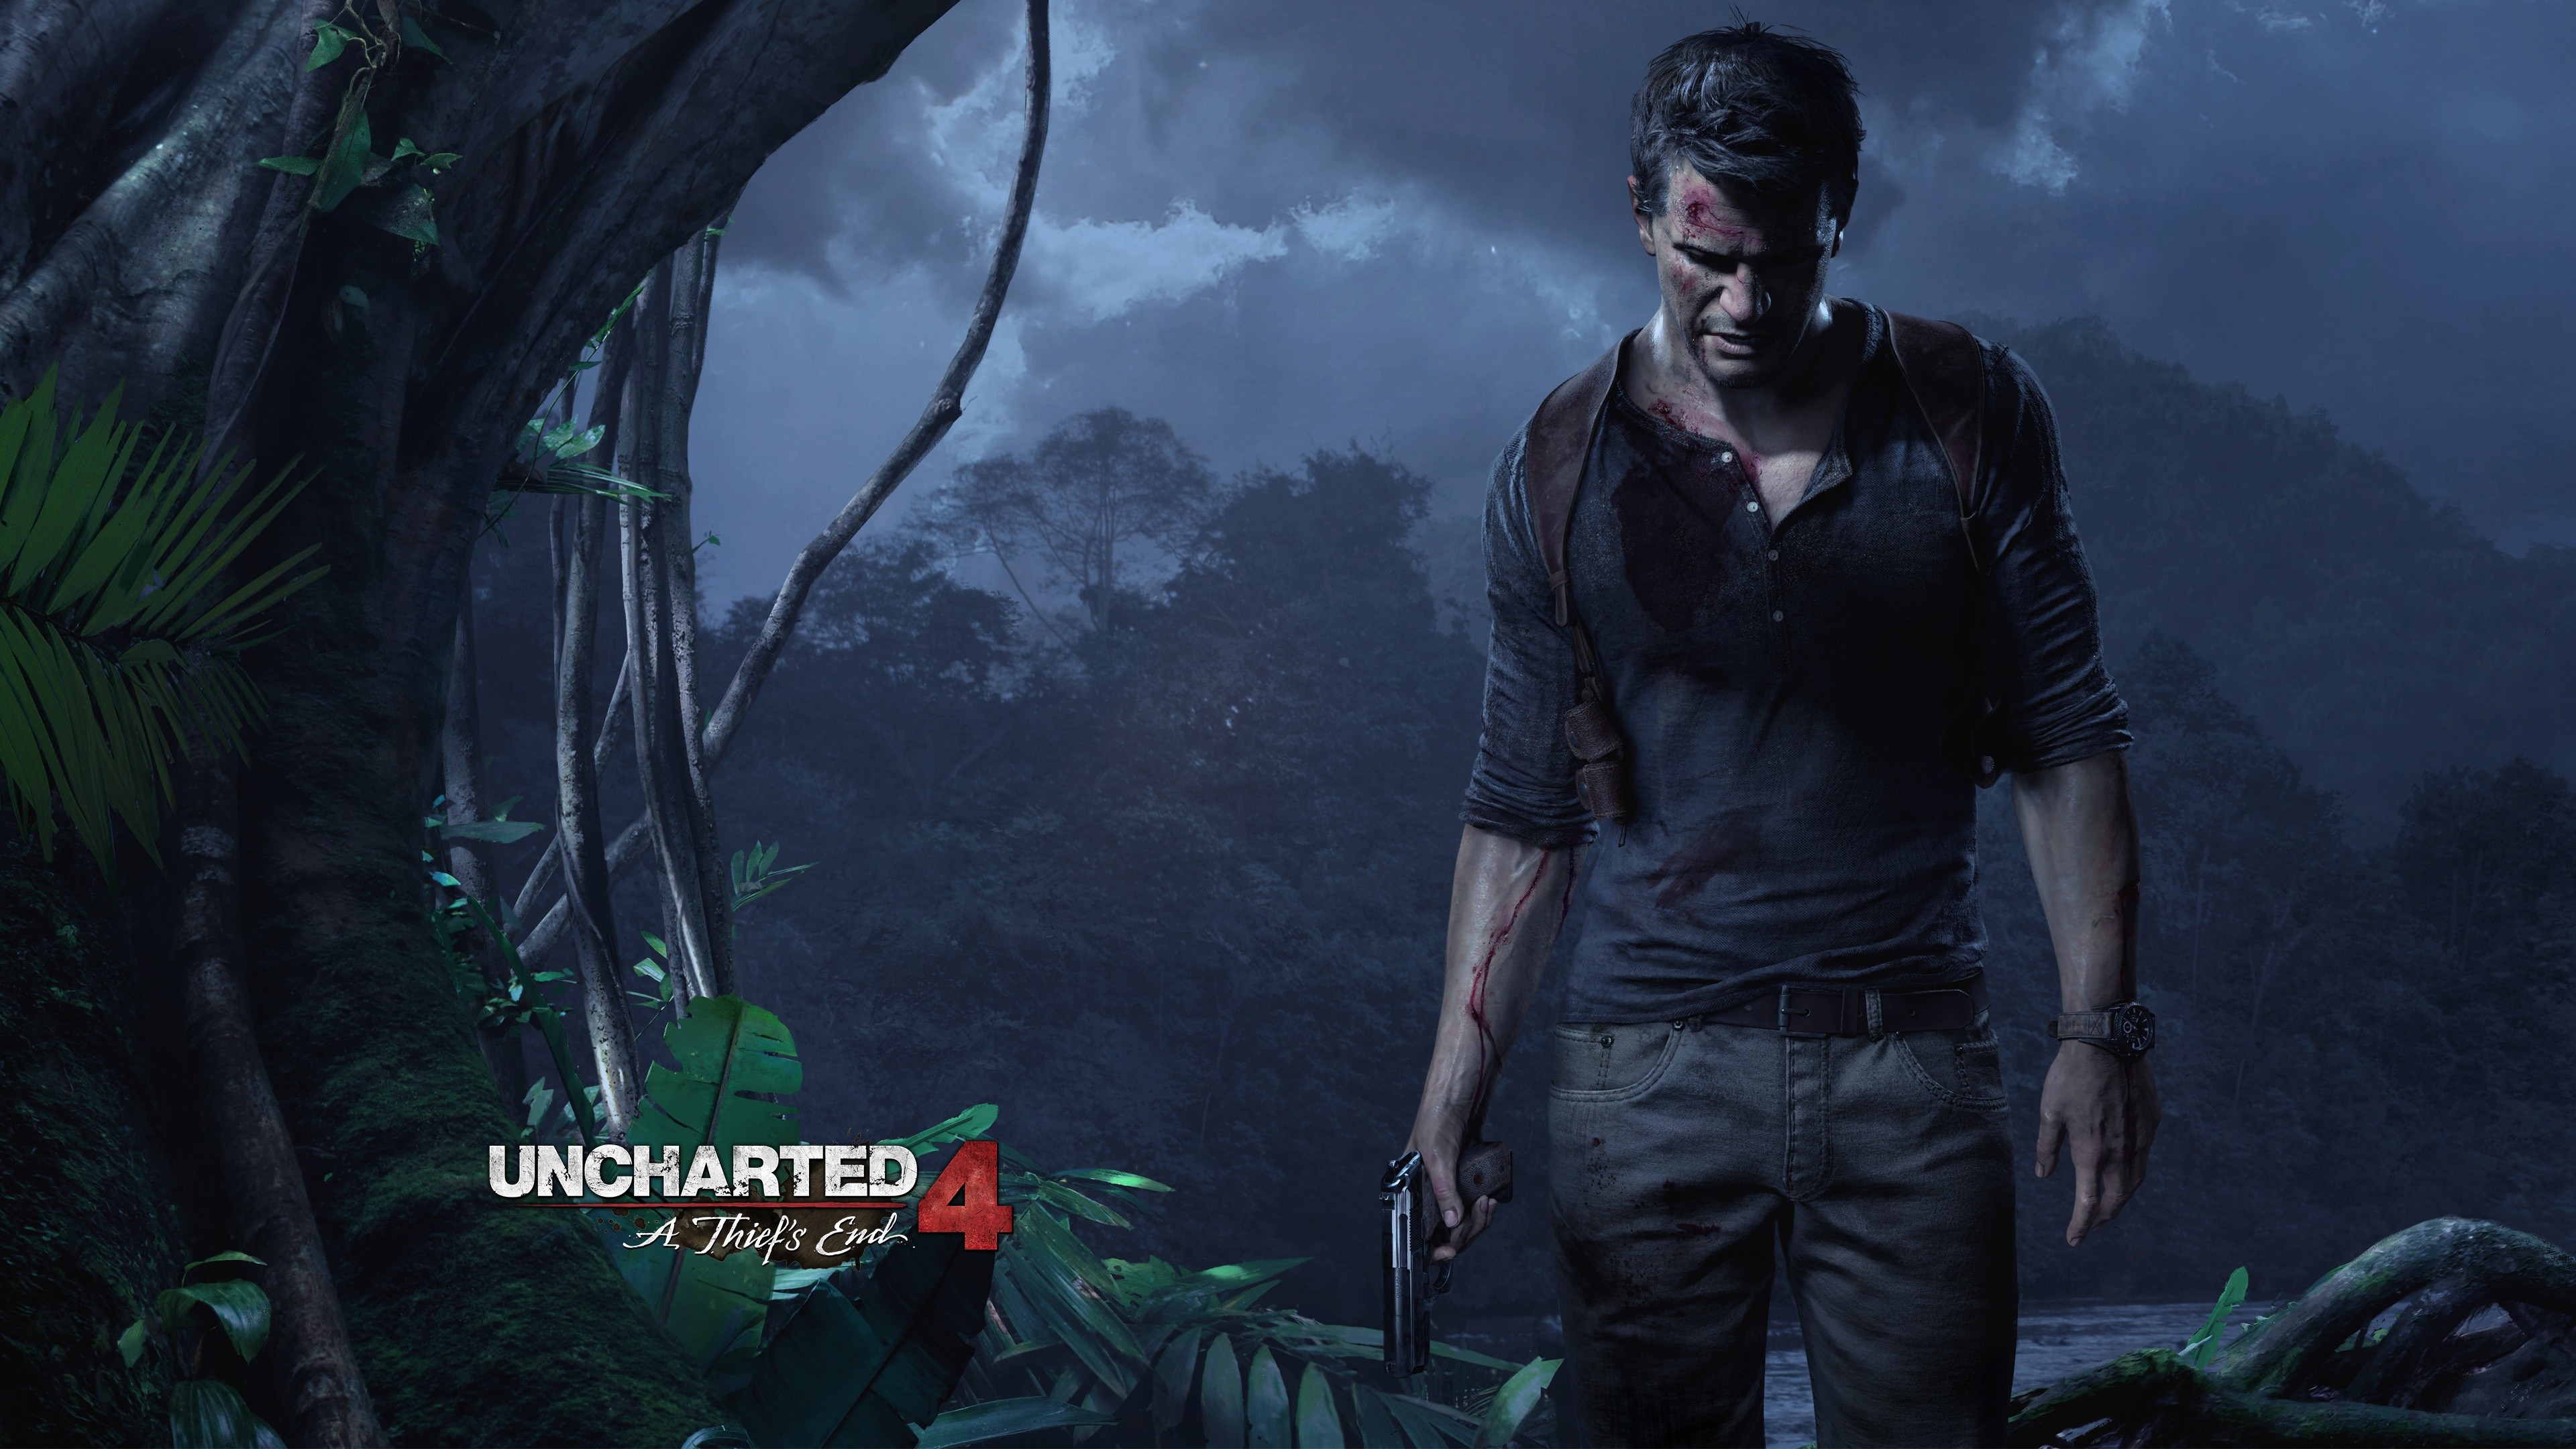 High Resolution Wallpaper | Uncharted 4: A Thief's End 3840x2160 px